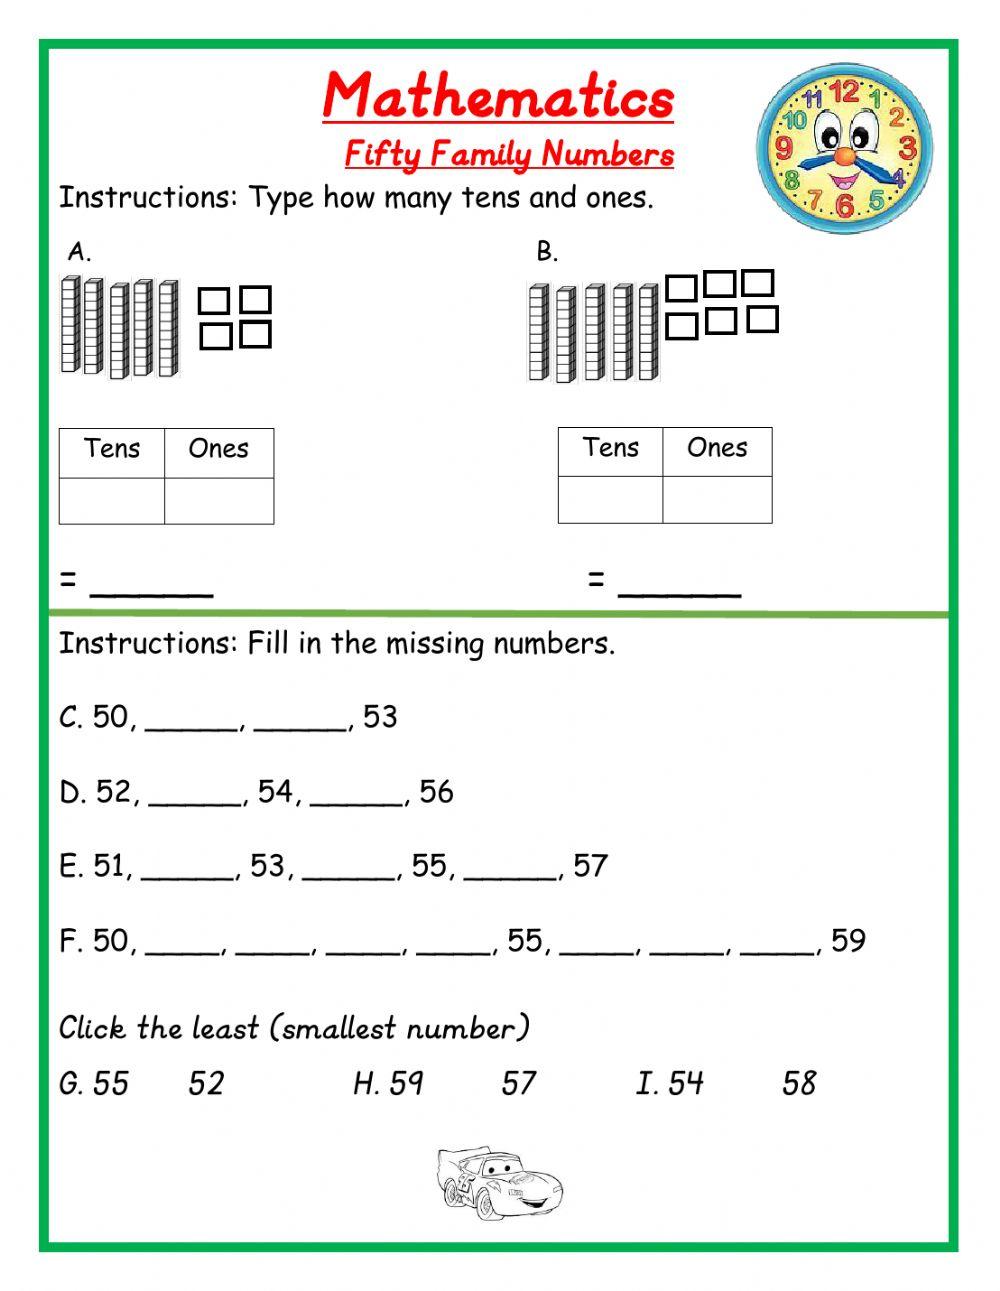 Fifty Family Numbers HW